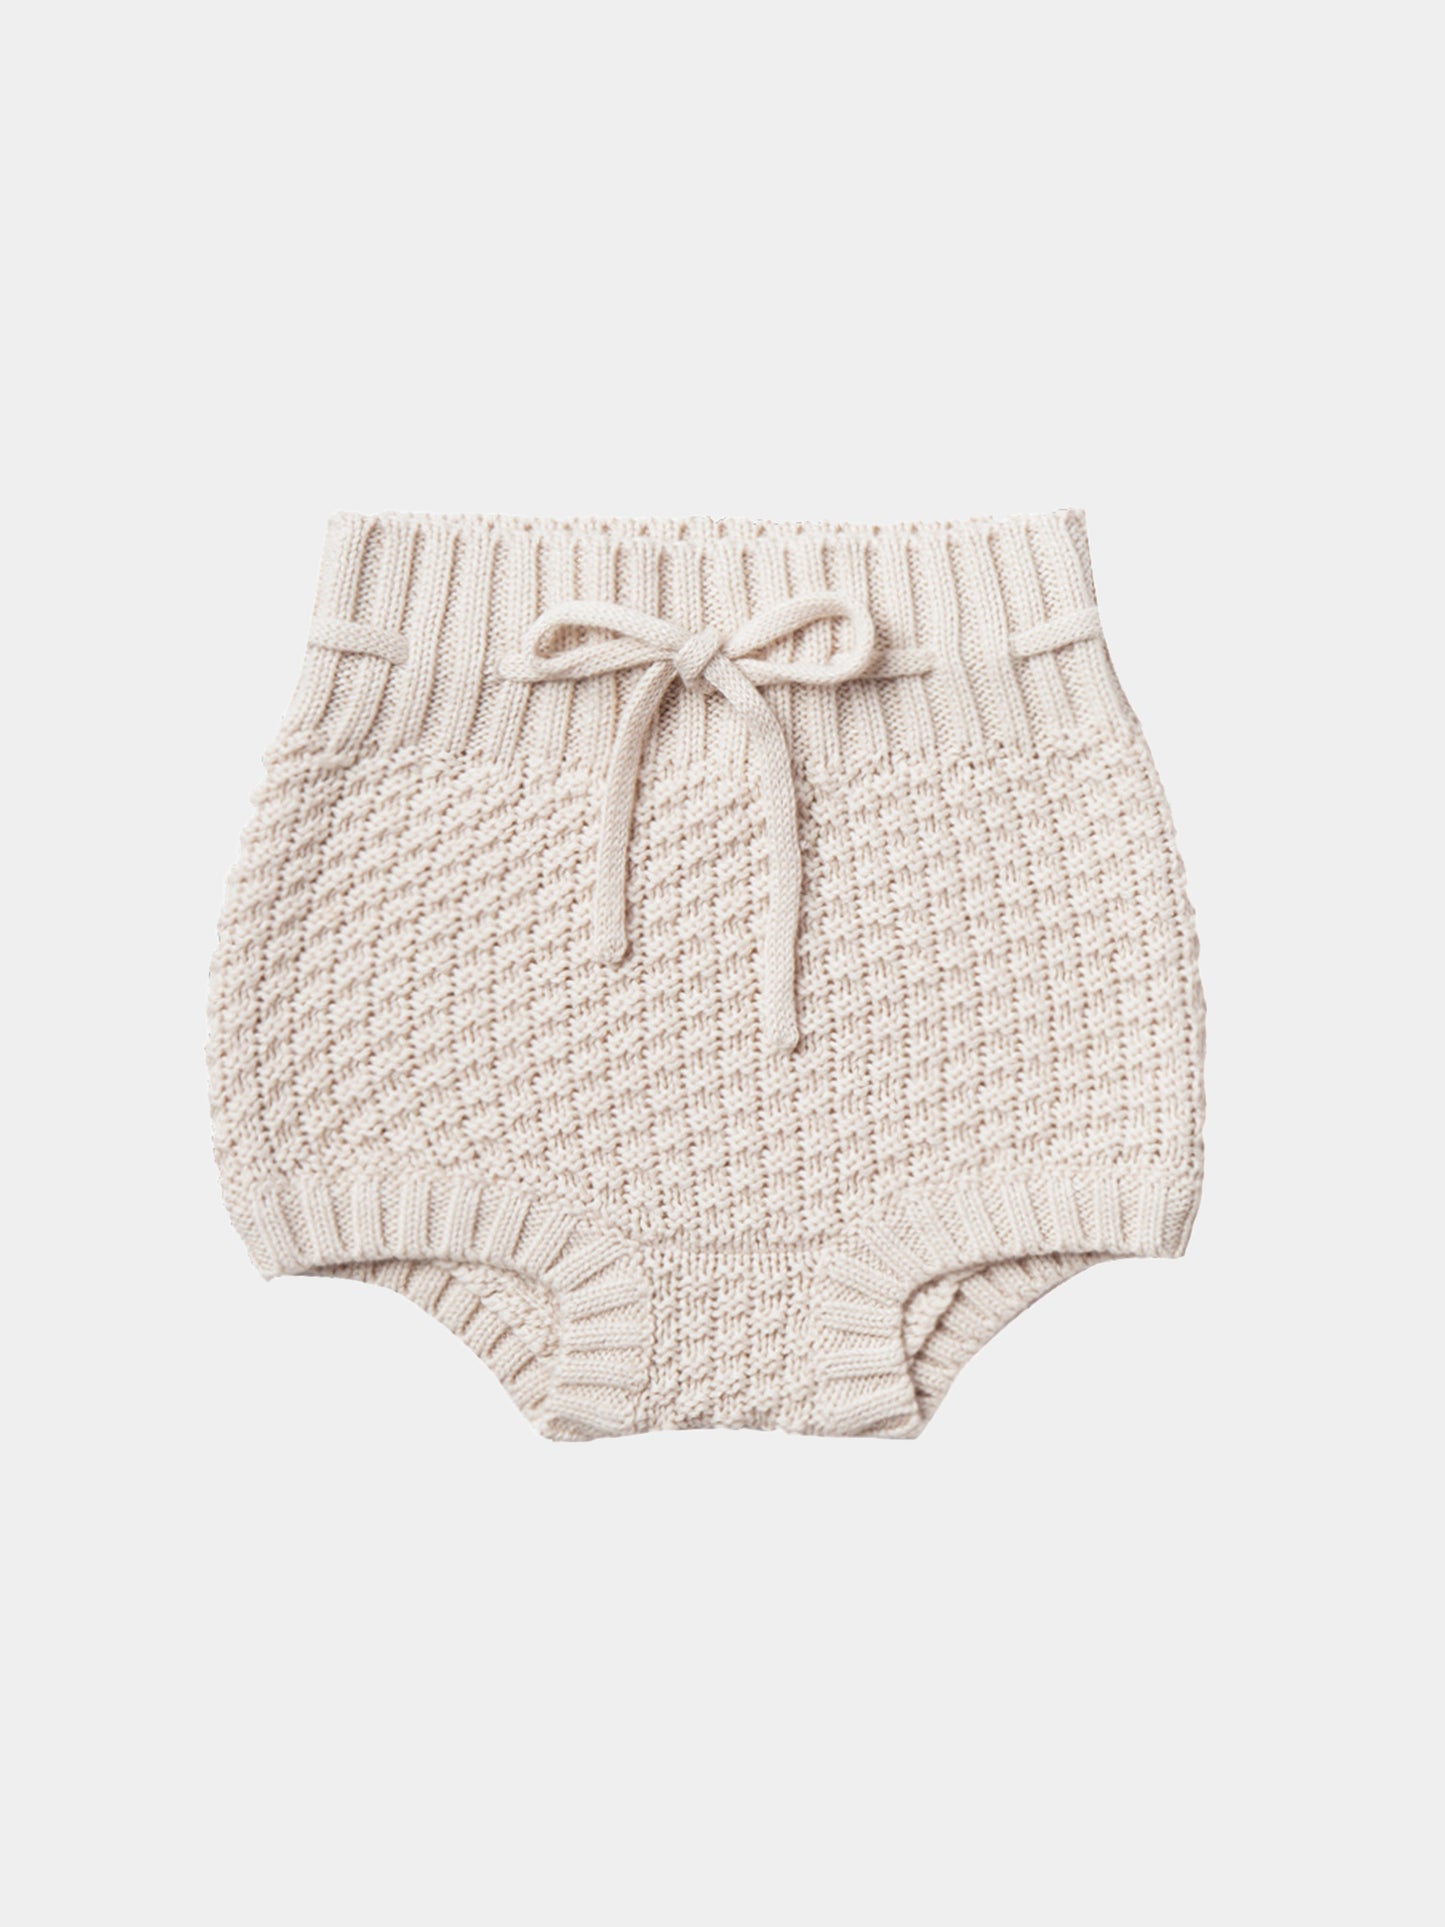 Quincy Mae Baby Knit Tie Bloomer